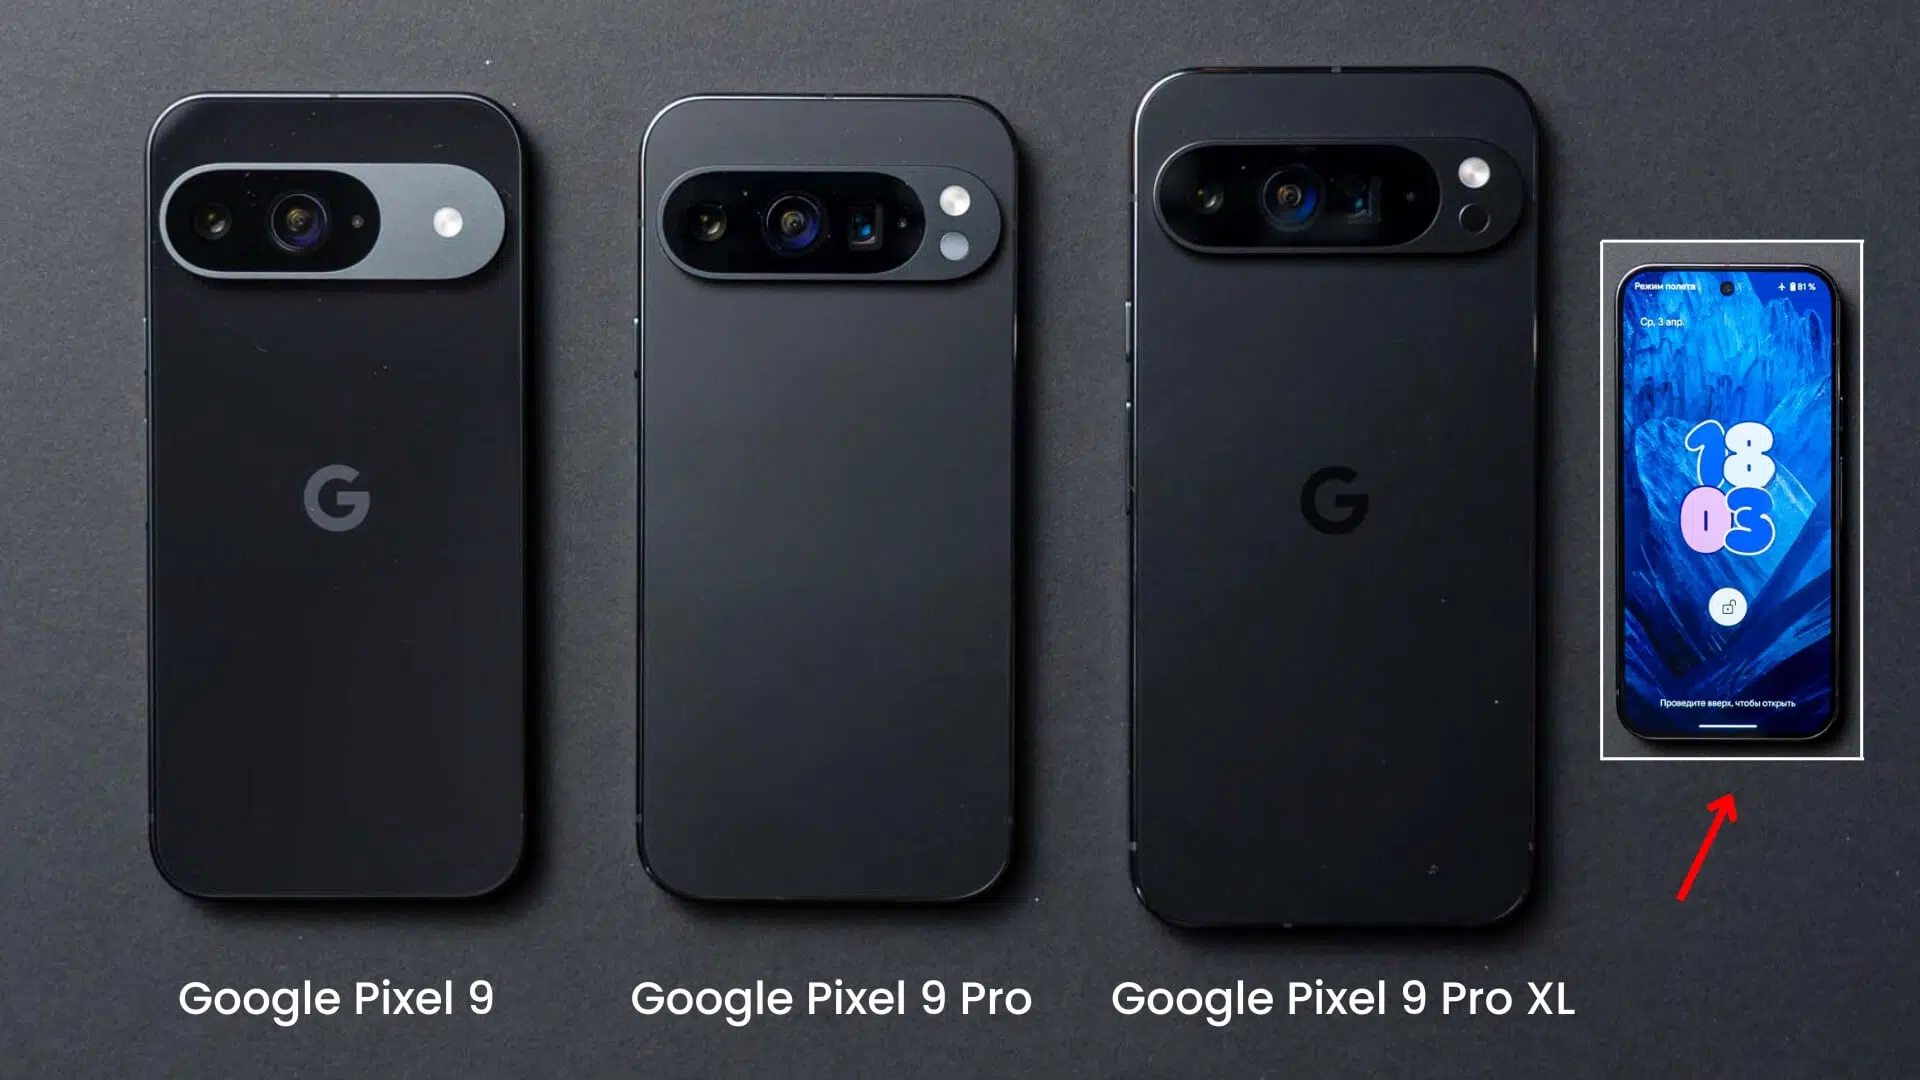 Real-Life Photos of All Google Pixel 9 Models Leaked